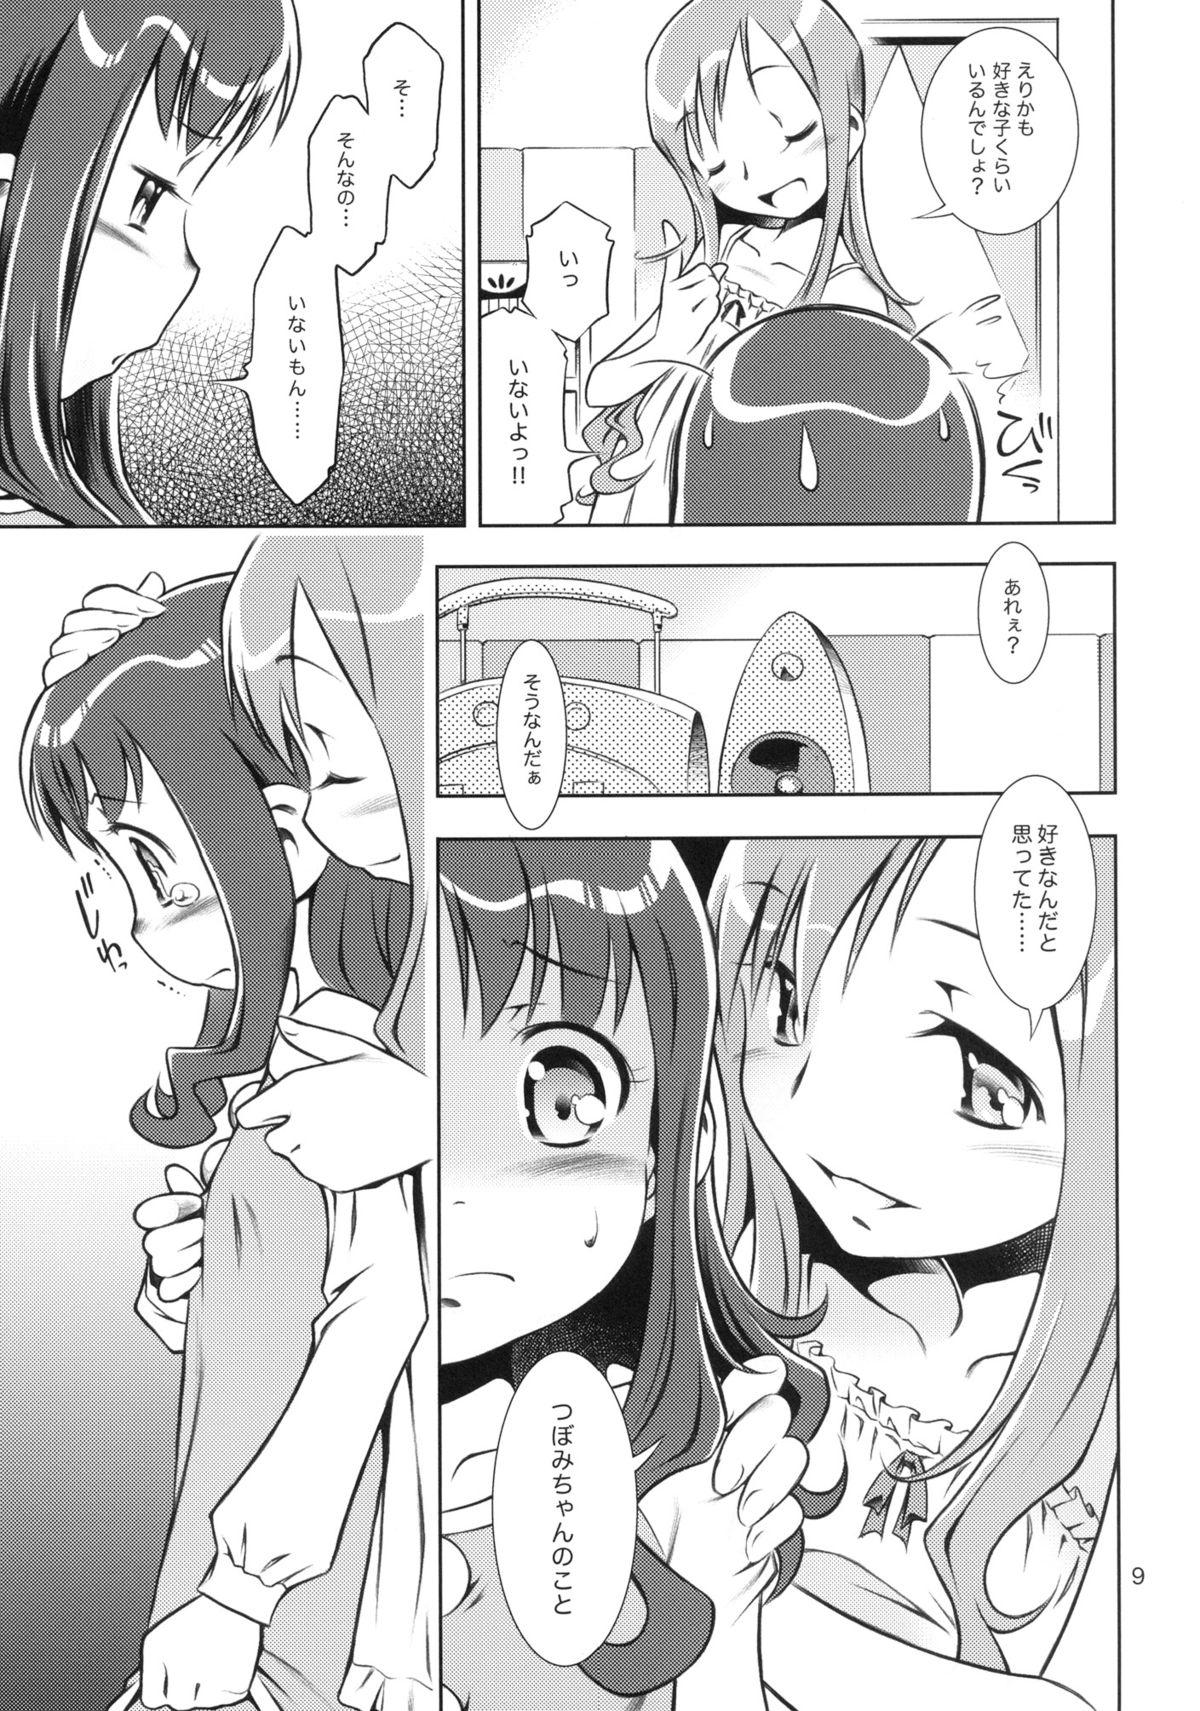 Boy Fuck Girl Girl in marine blue * - Heartcatch precure Close Up - Page 9